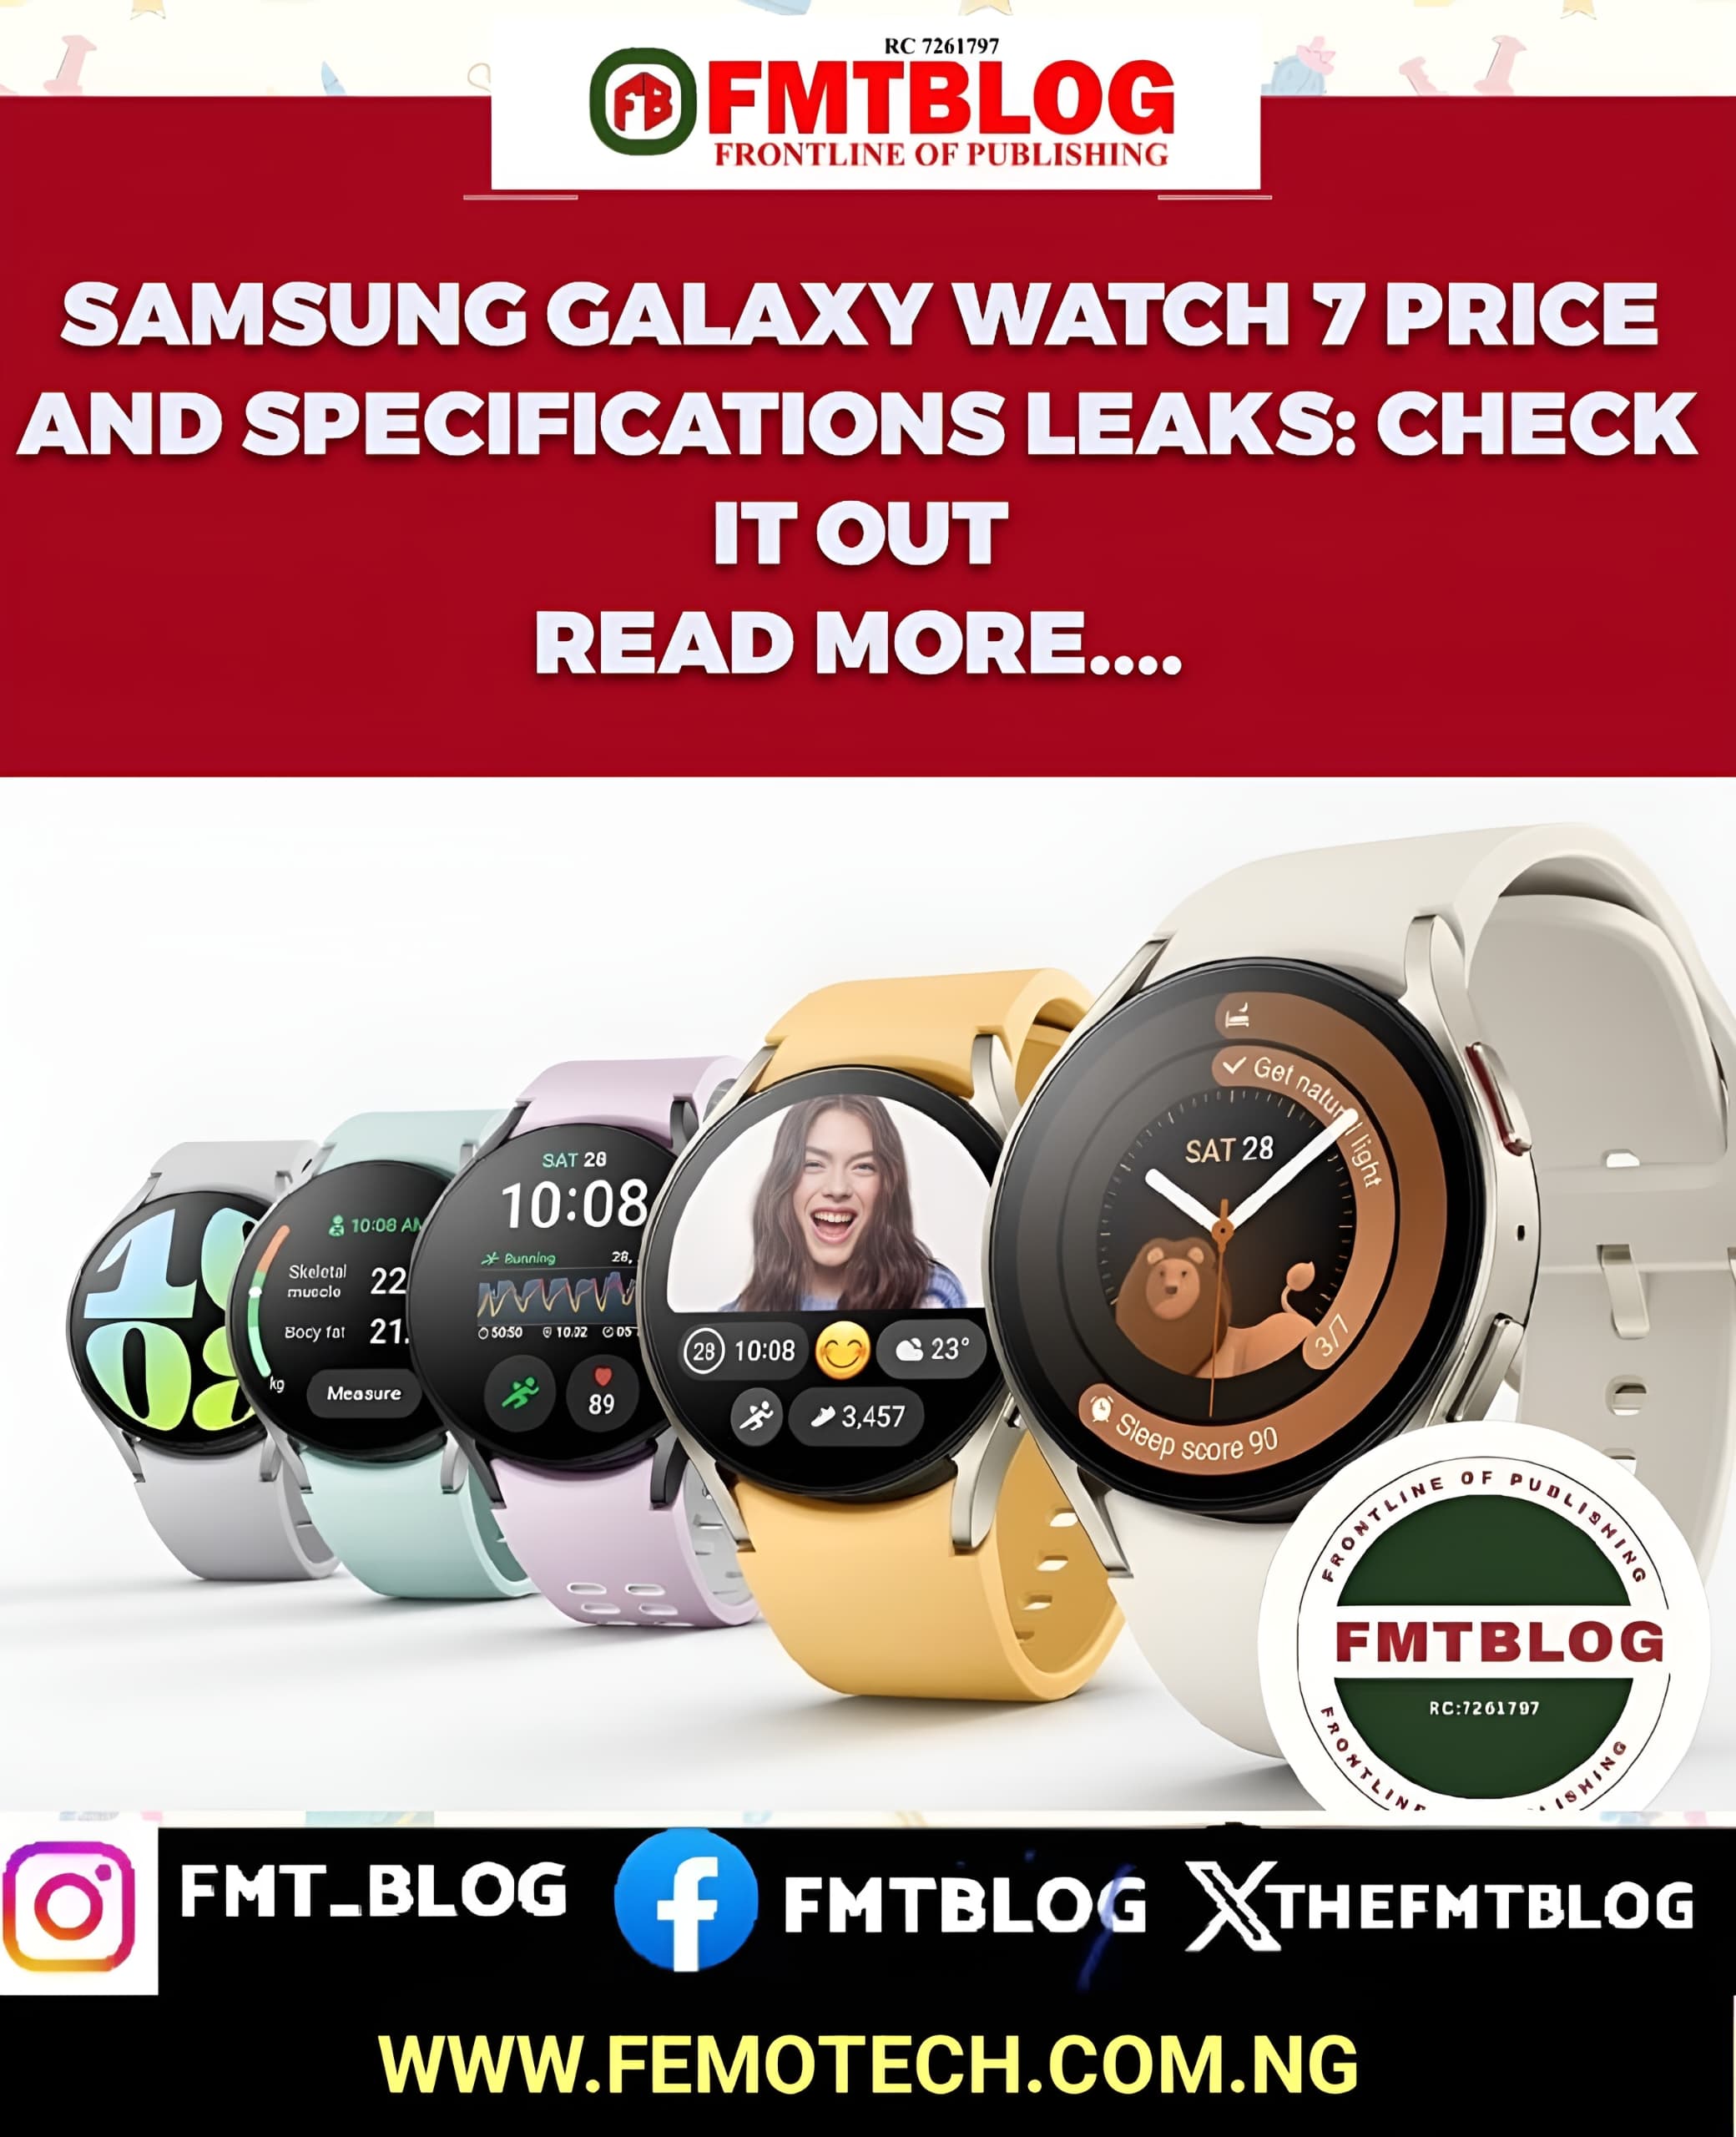 Samsung Galaxy Watch 7 Price, Specifications Leaks- Check It Out